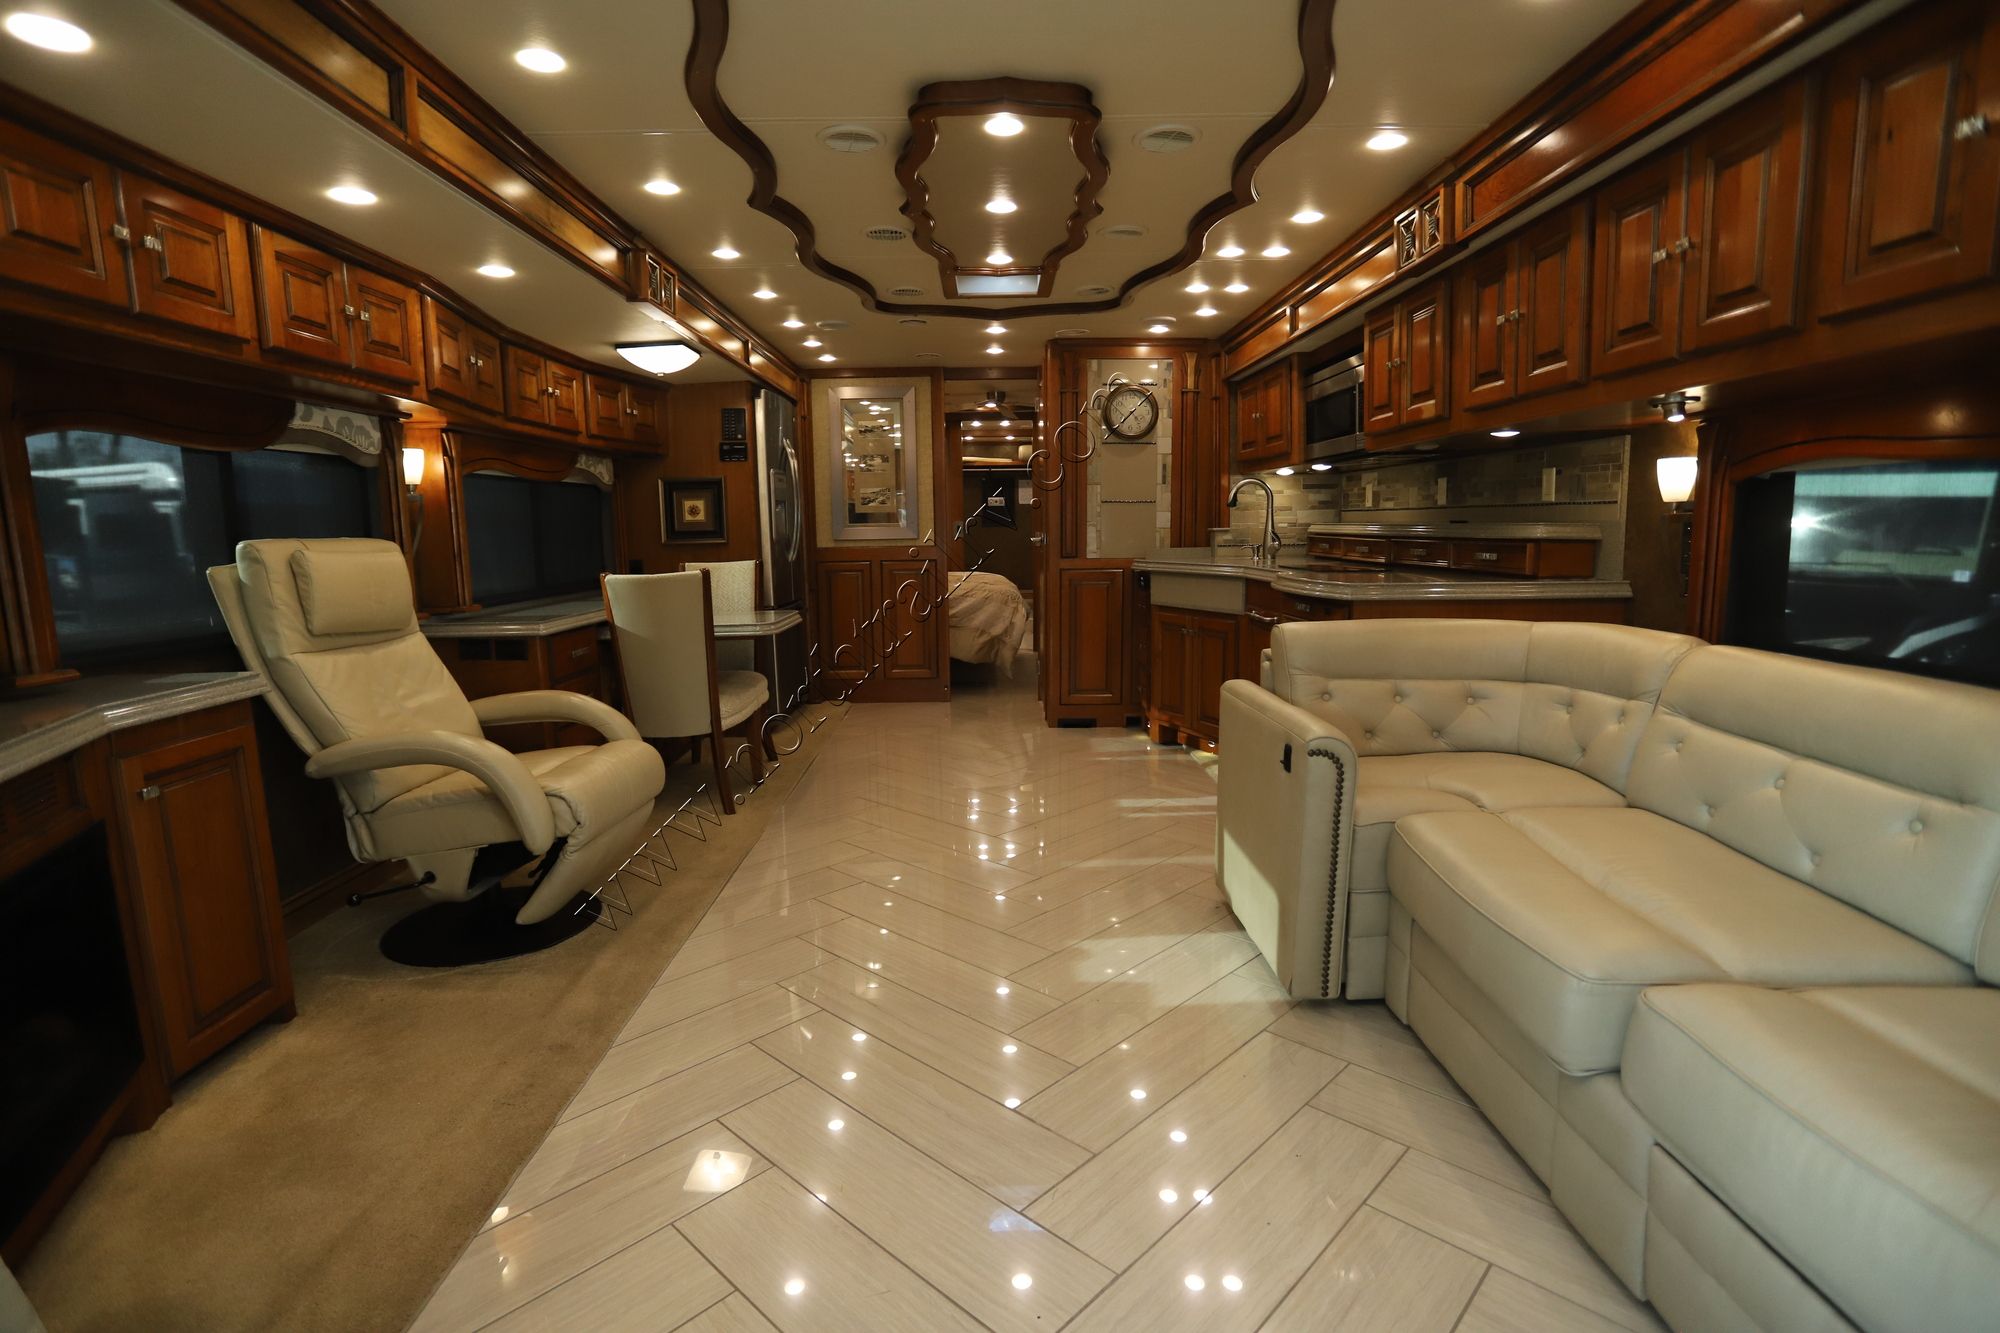 Used 2014 Tiffin Motor Homes Allegro Bus 45LP Class A  For Sale